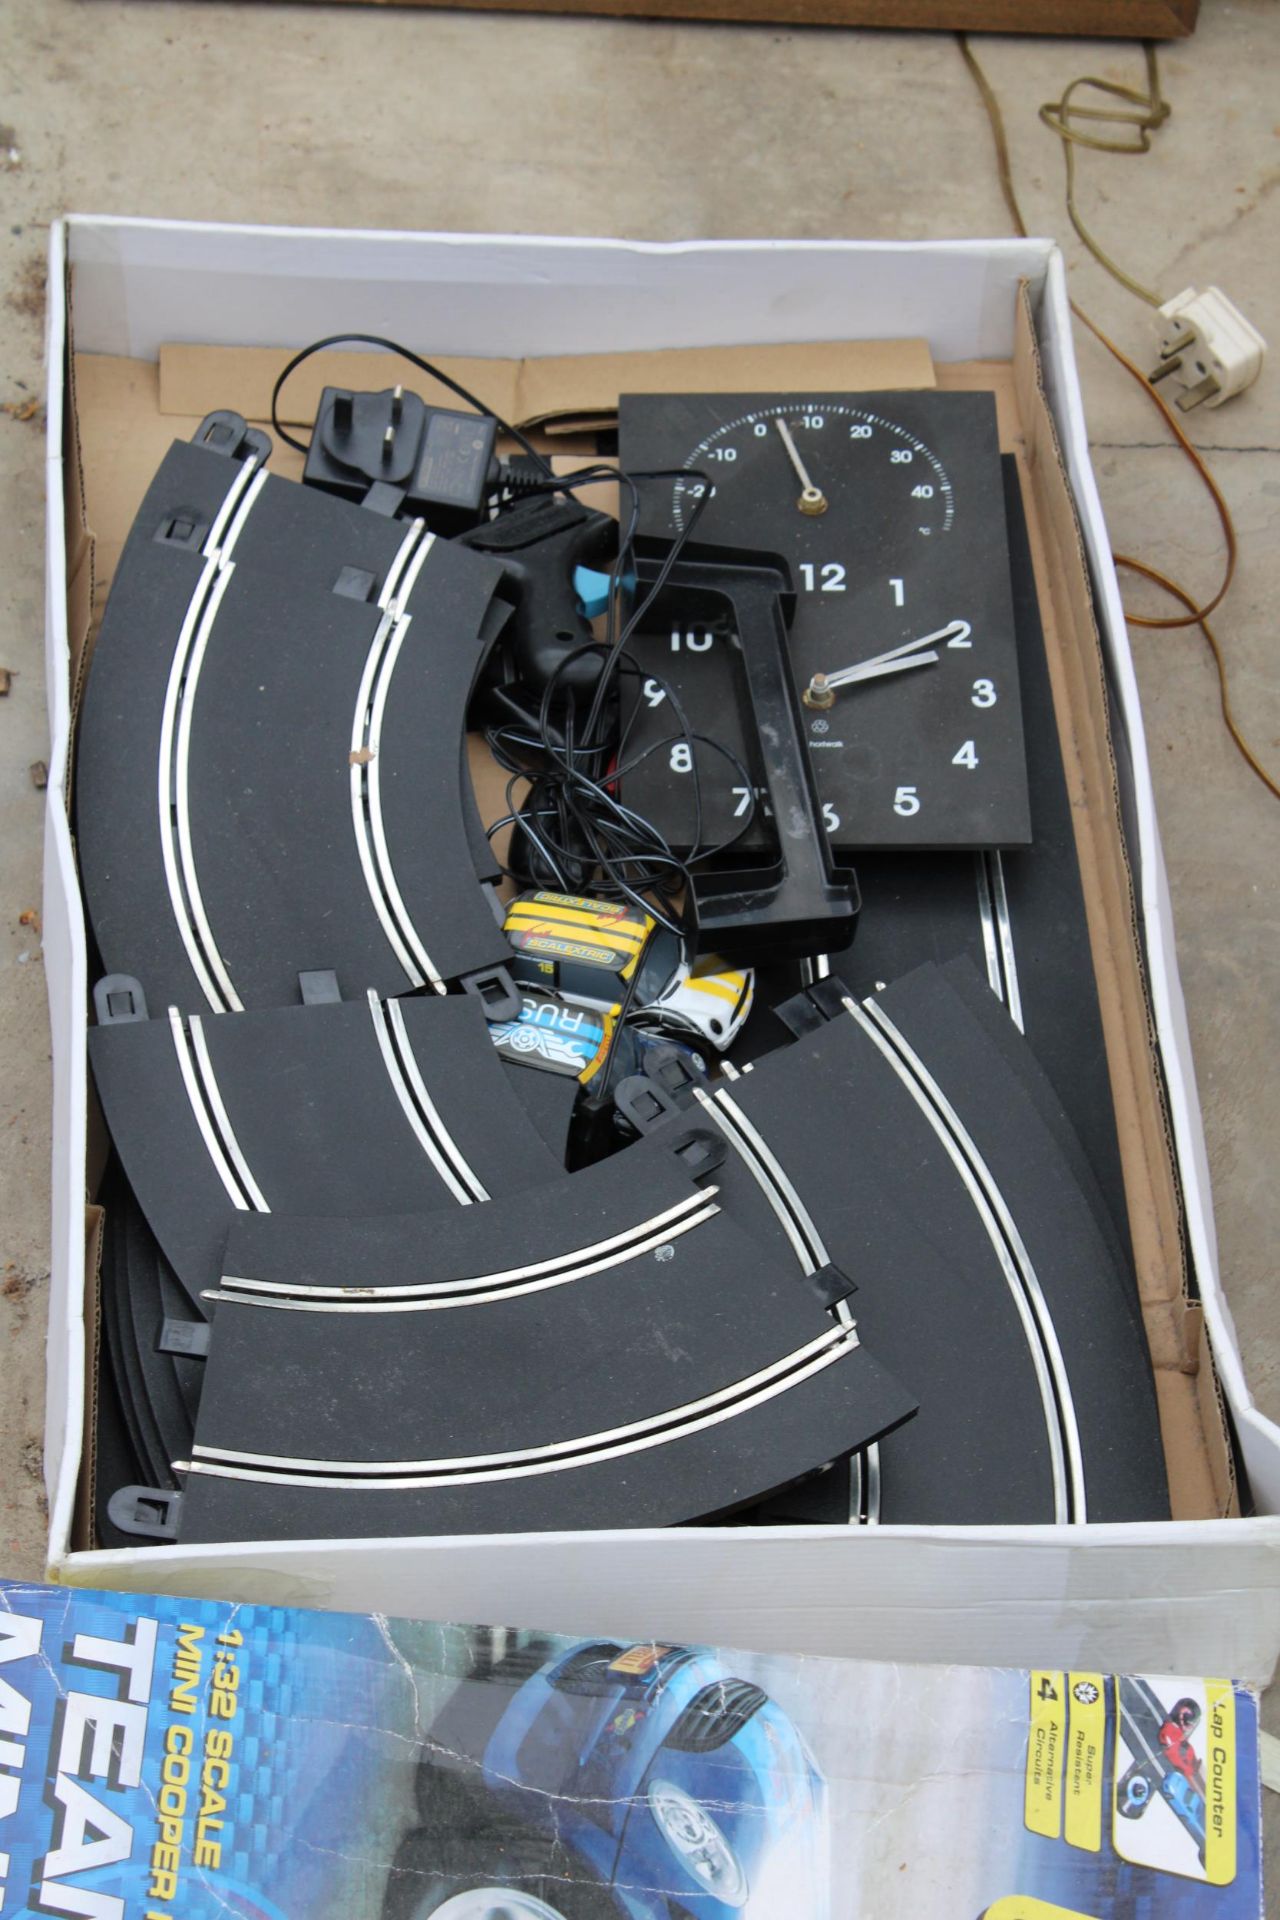 A SCALEXTRIC SET COMPLETE WITH TWO CARS - Image 2 of 2